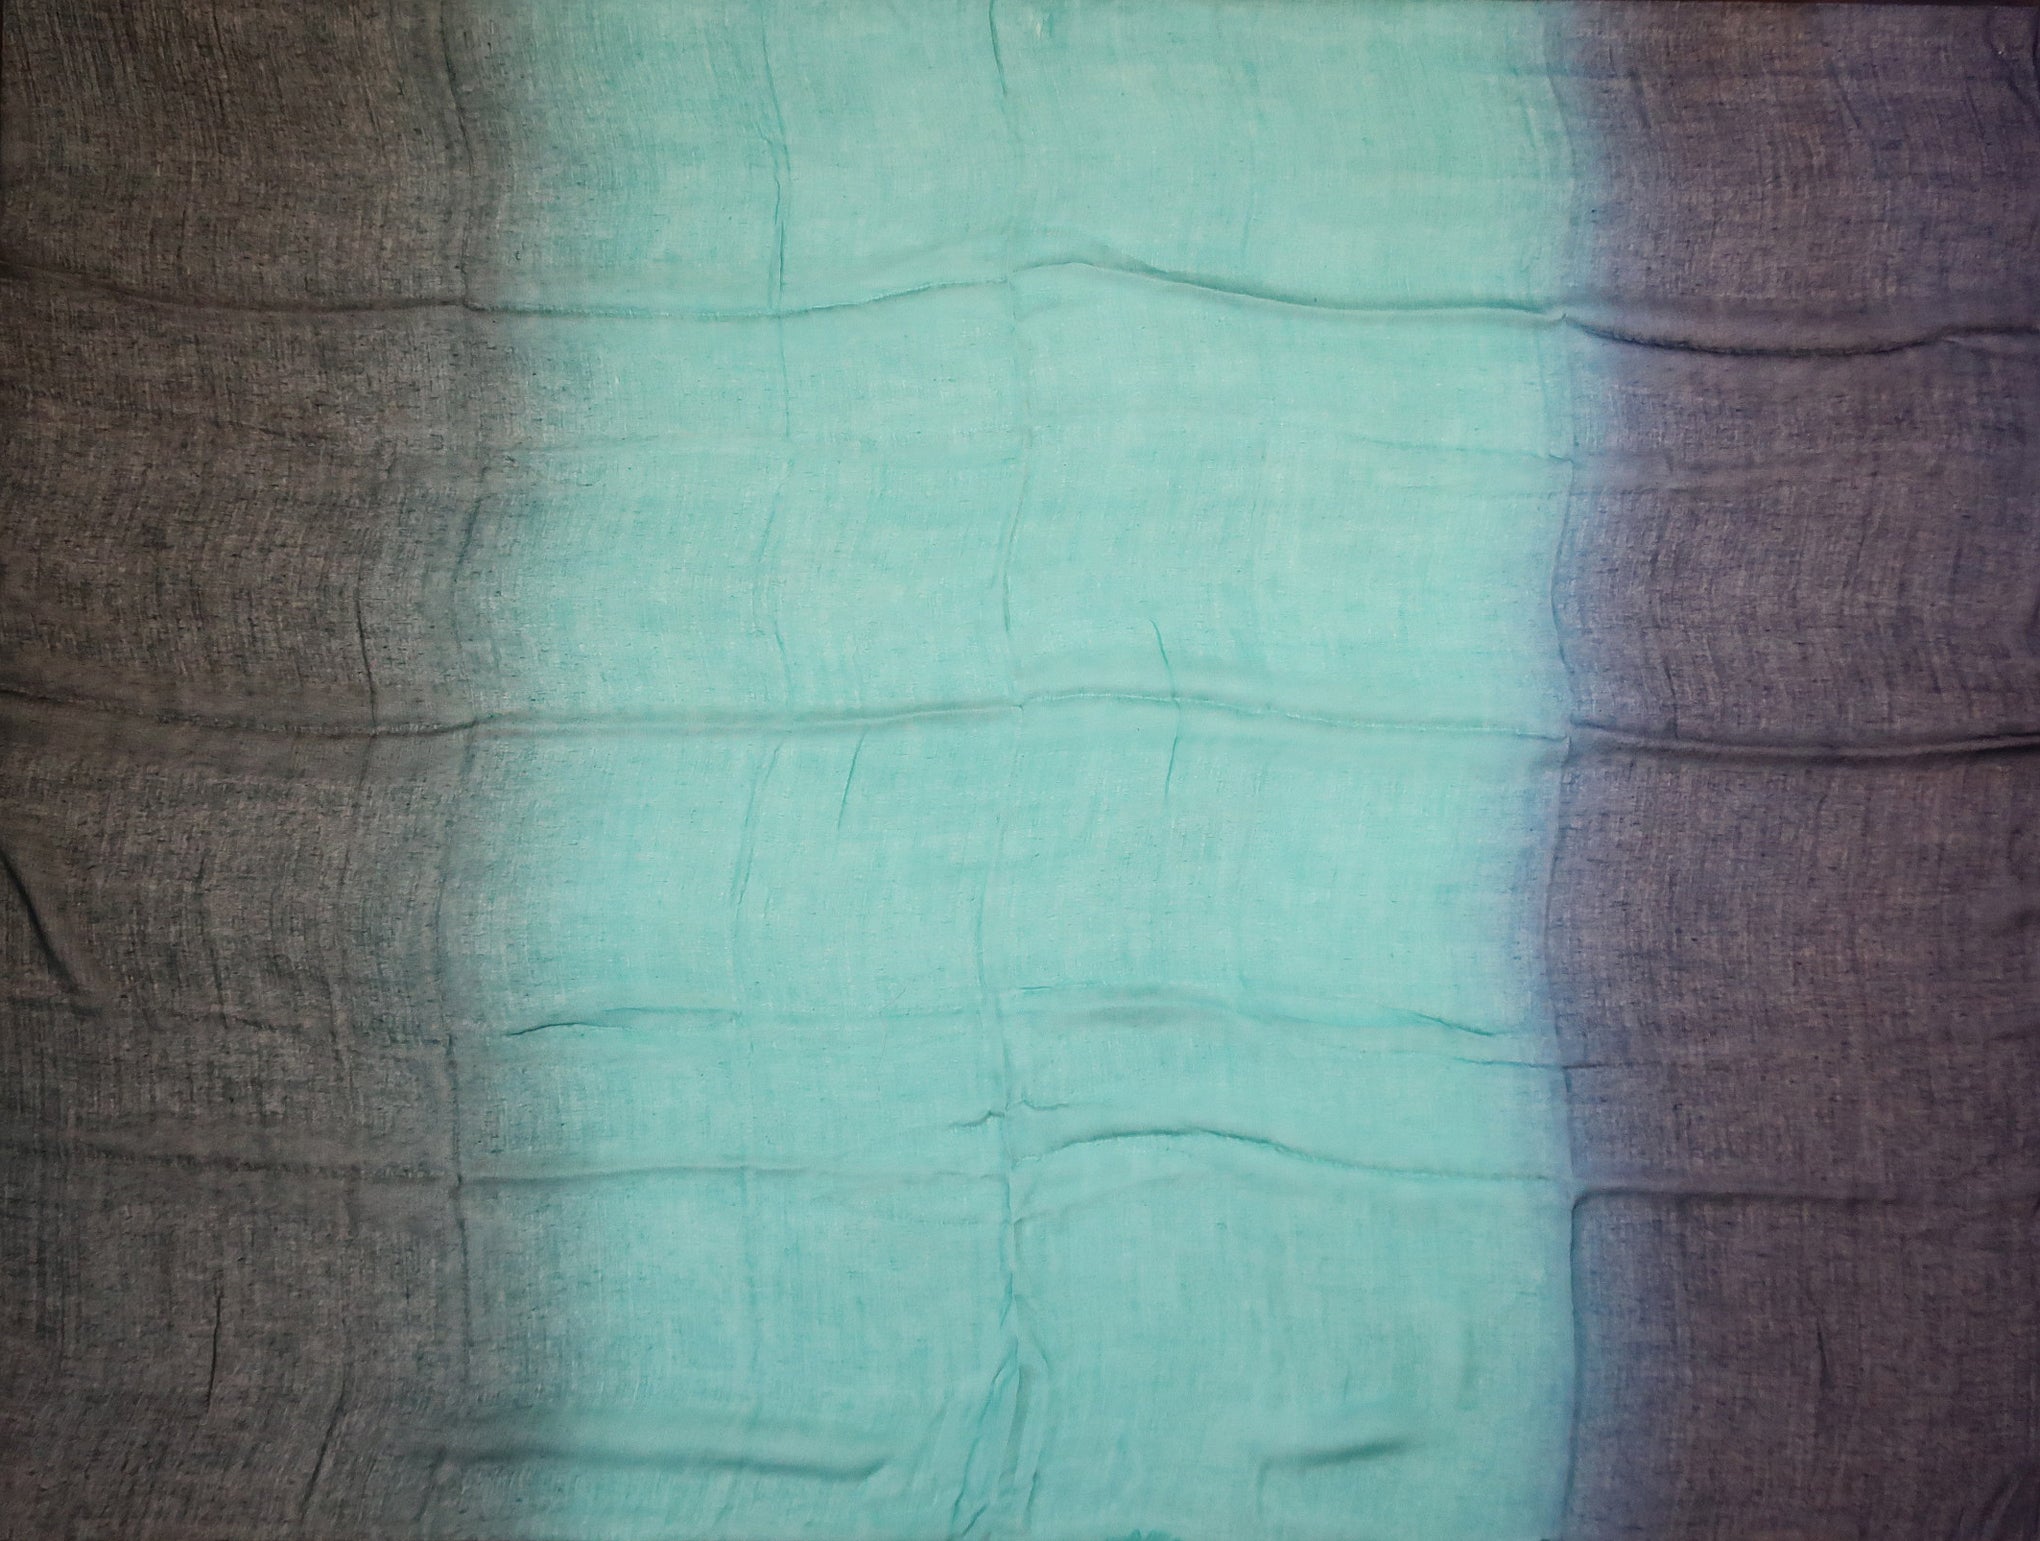 Blue Pacific Dream Cashmere and Silk Scarf in Teal Turquoise and Navy 47 x 37